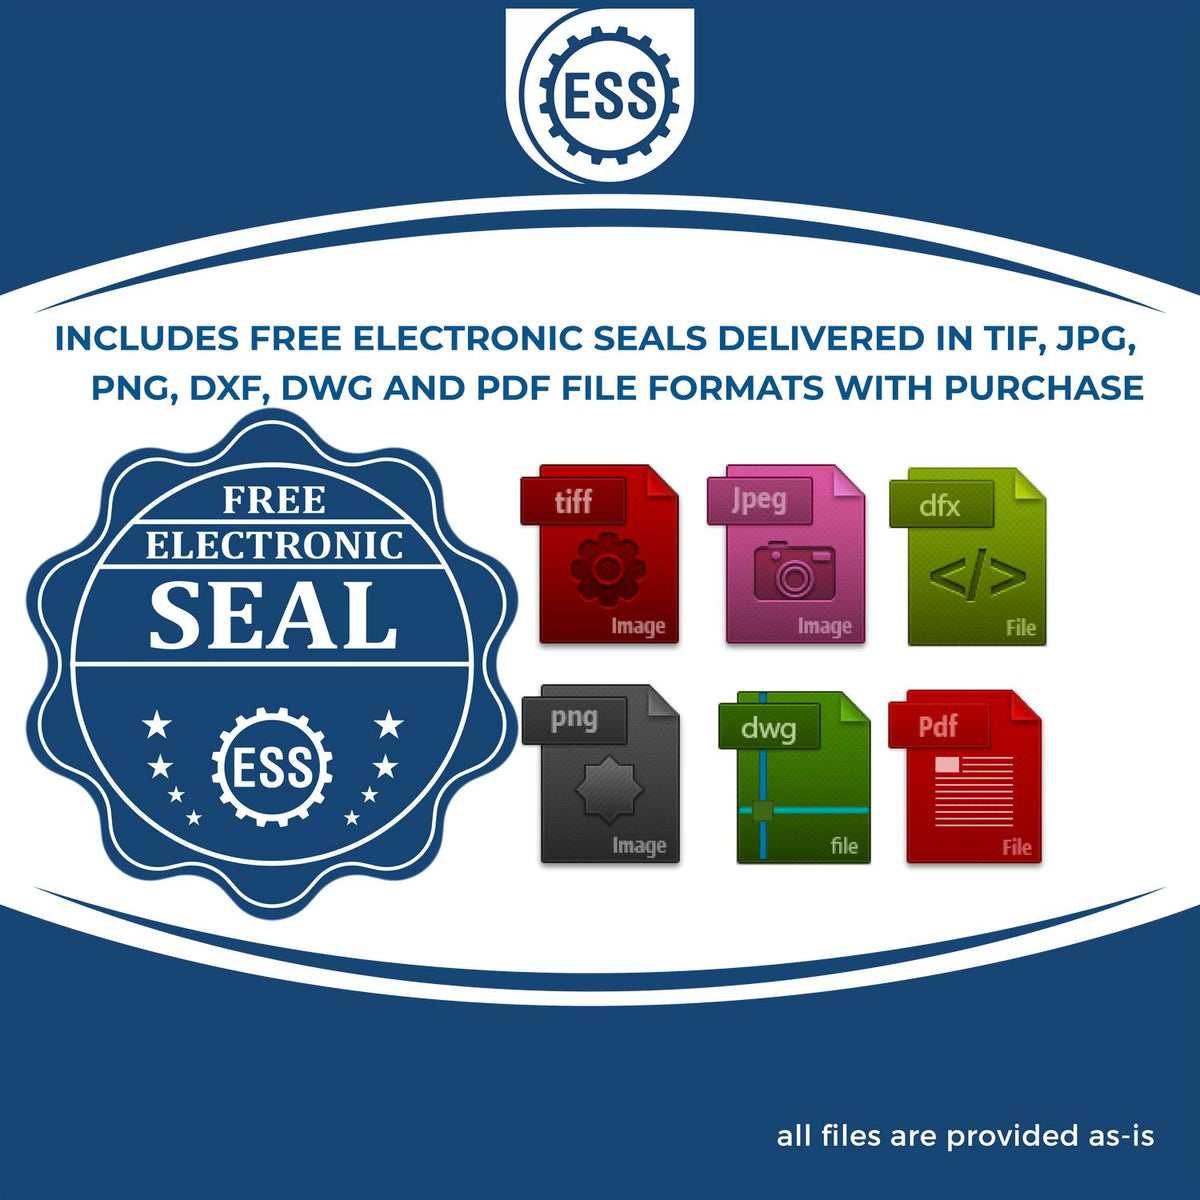 An infographic for the free electronic seal for the Extended Long Reach Indiana Surveyor Embosser illustrating the different file type icons such as DXF, DWG, TIF, JPG and PNG.